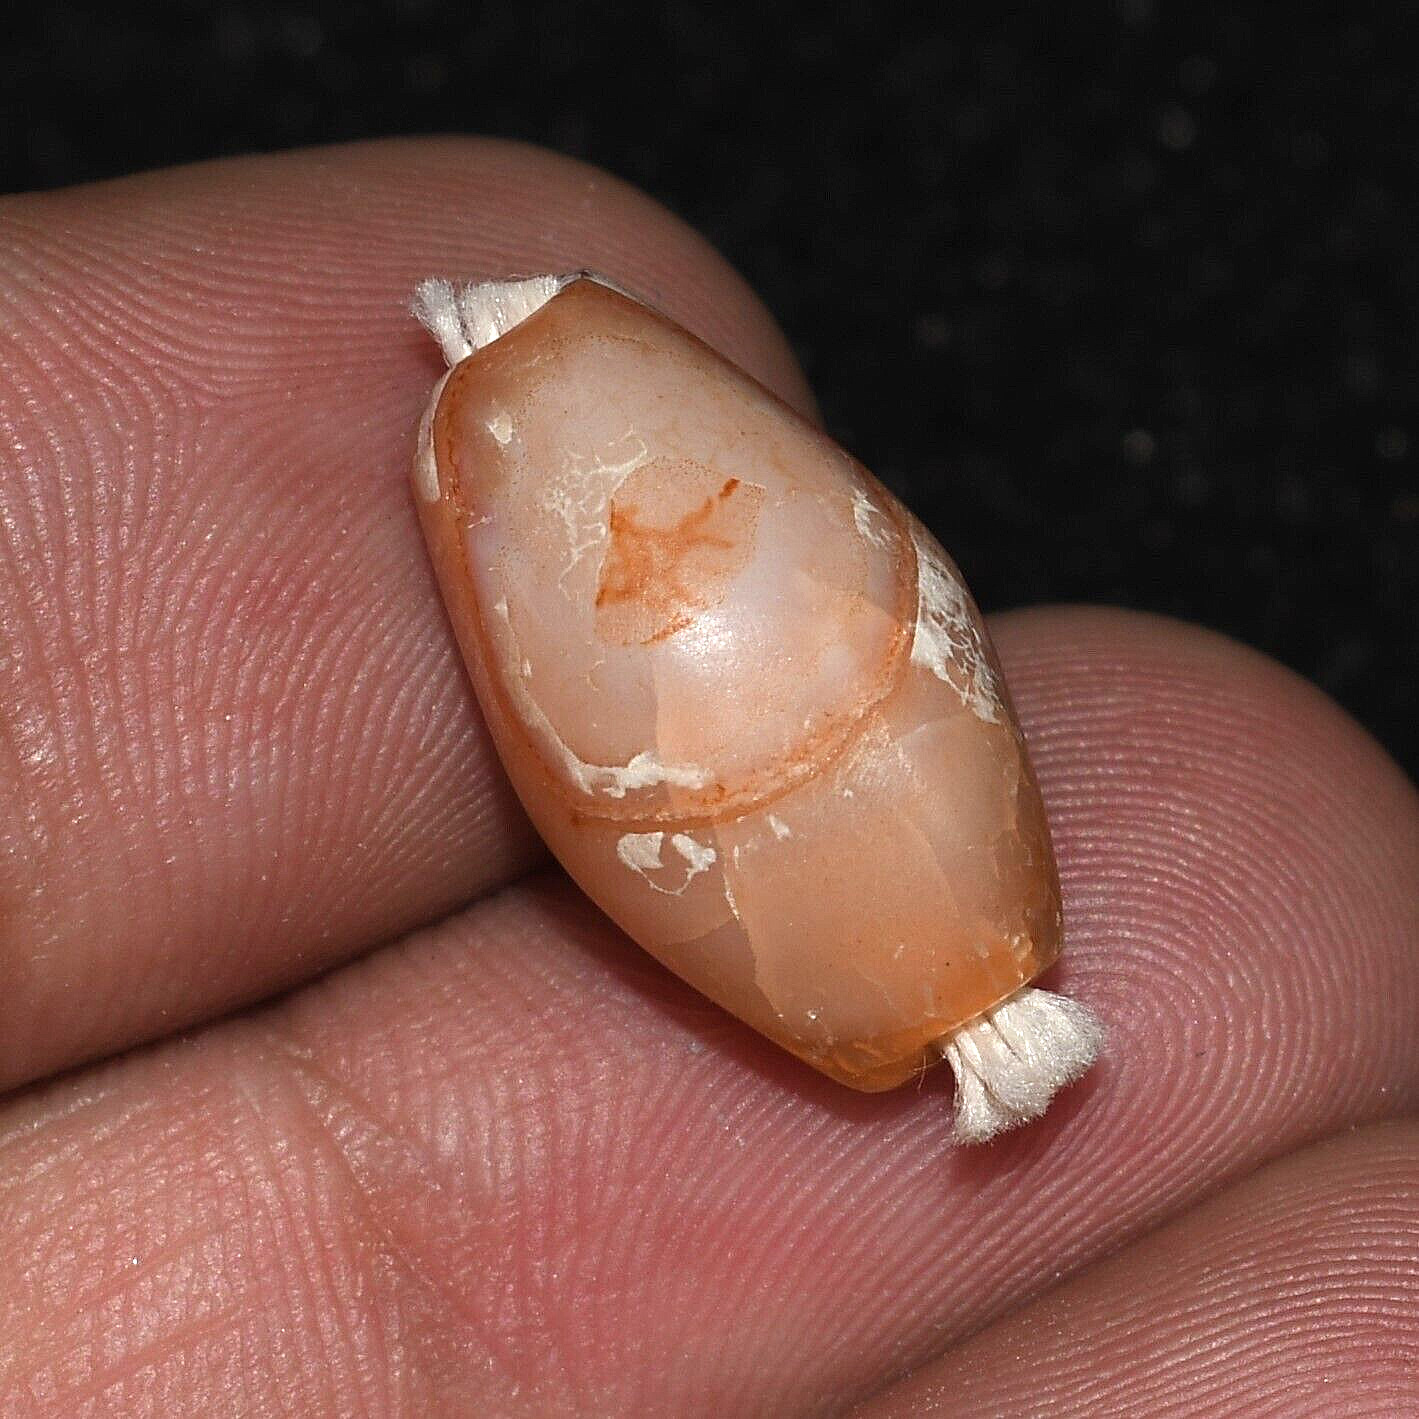 Genuine Ancient Carnelian Longevity Bead in Good Condition over 2000 Years Old